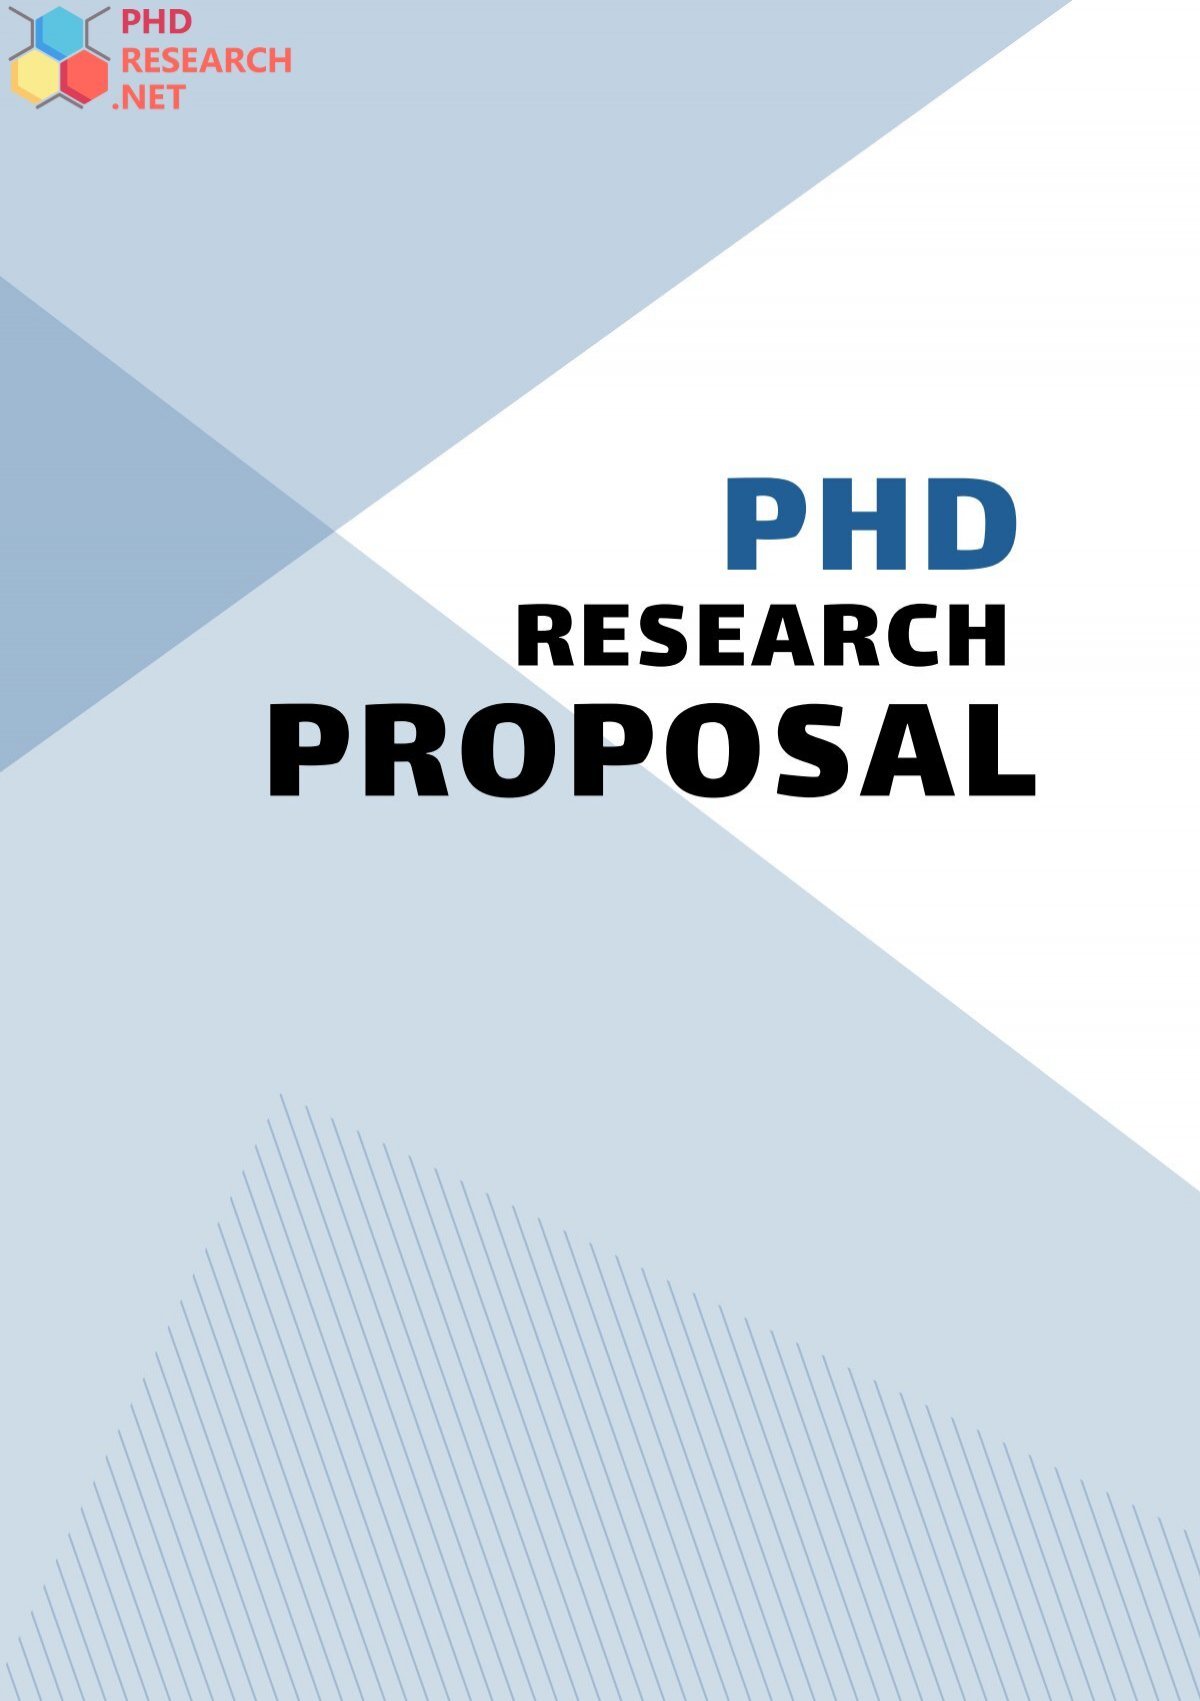 phd research proposal in hrm